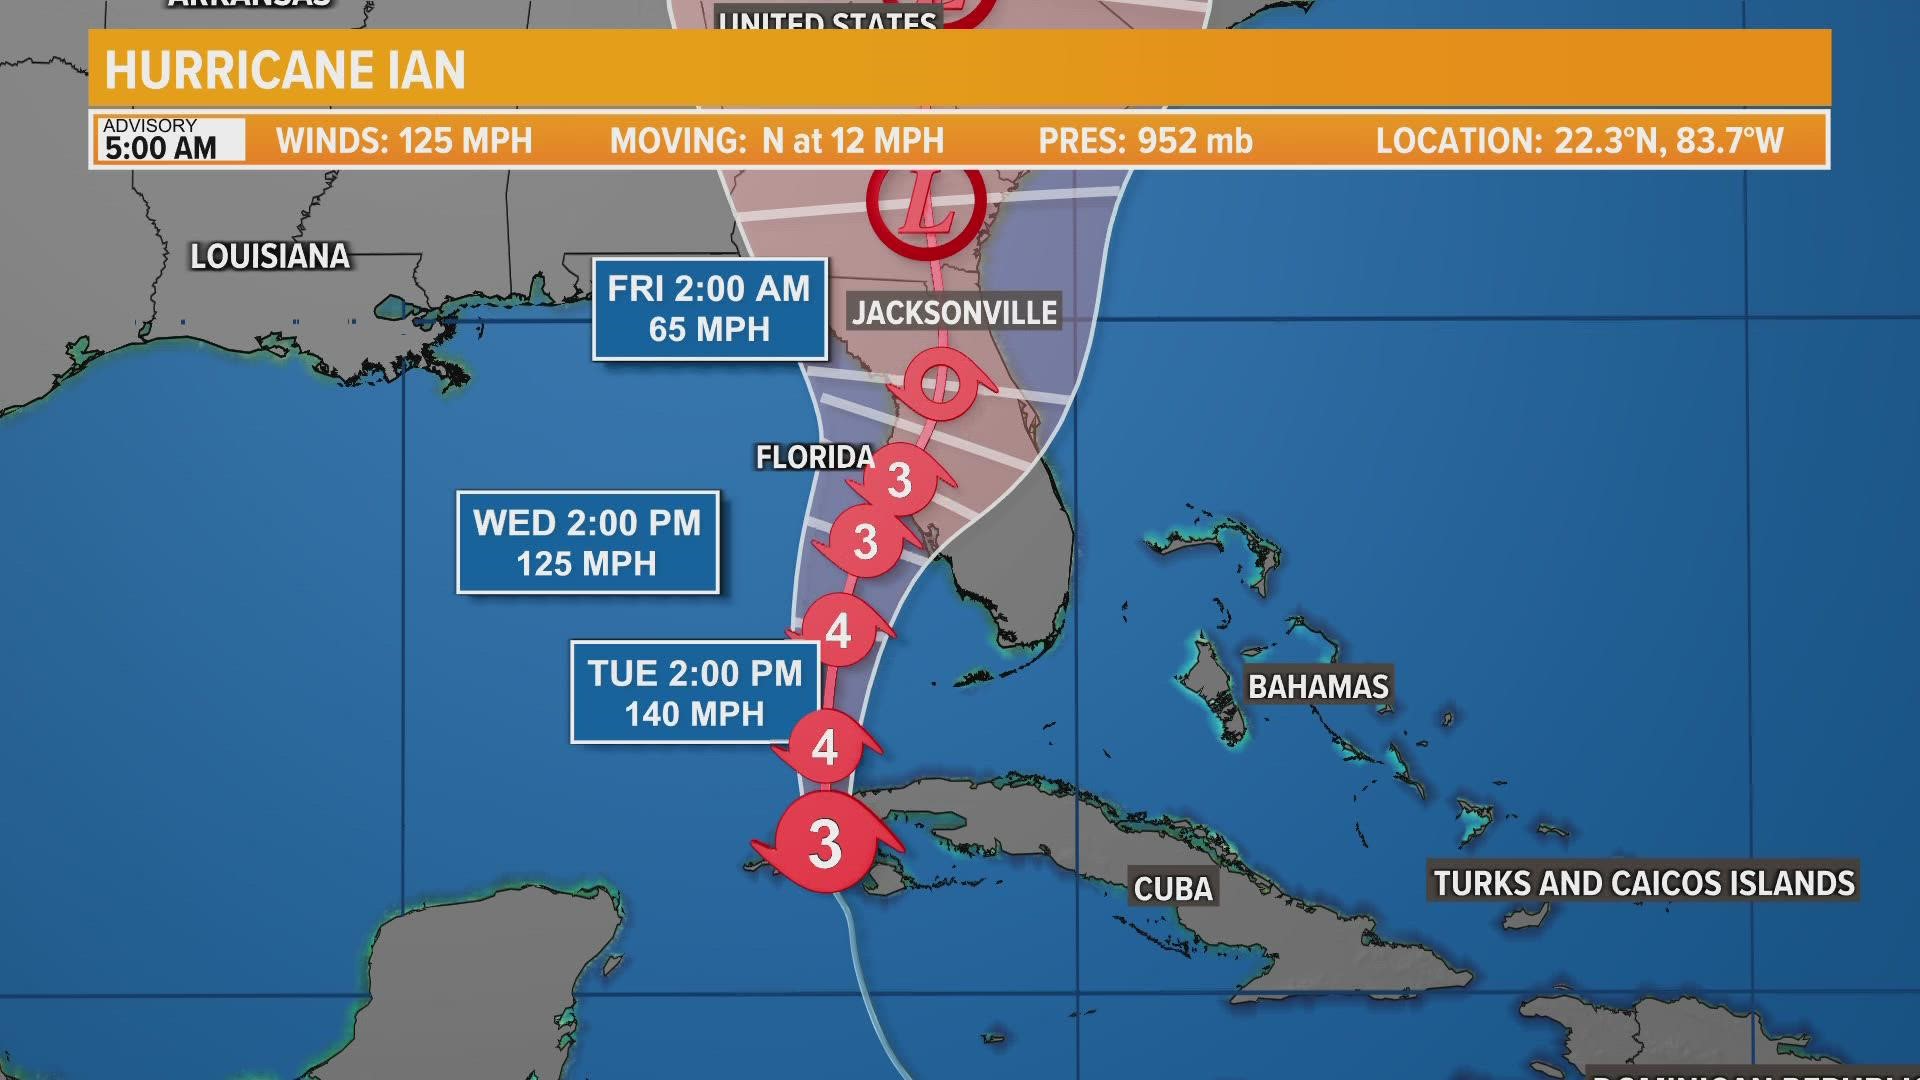 As counties across the First Coast go into tropical storm watch, First Coast News is continuing to track Hurricane Ian and the provide latest models.